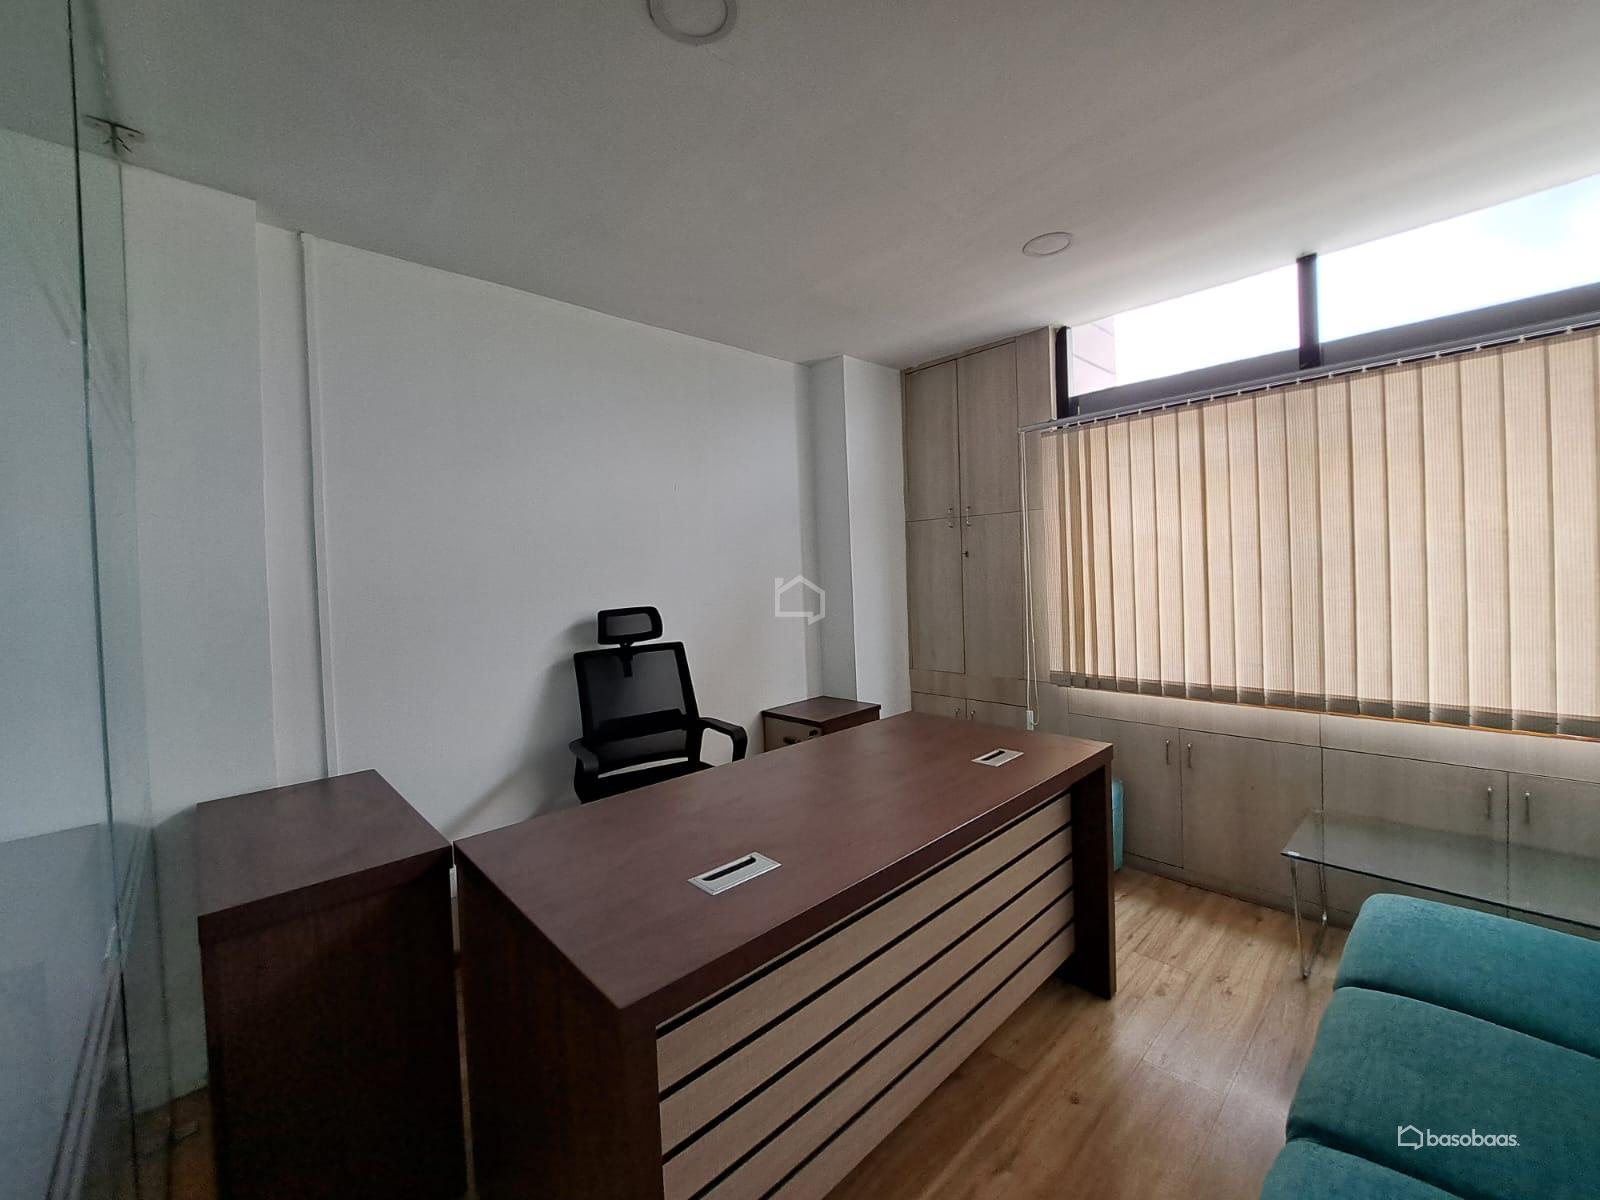 COMMERCIAL : Office Space for Rent in Baneshwor, Kathmandu Image 4